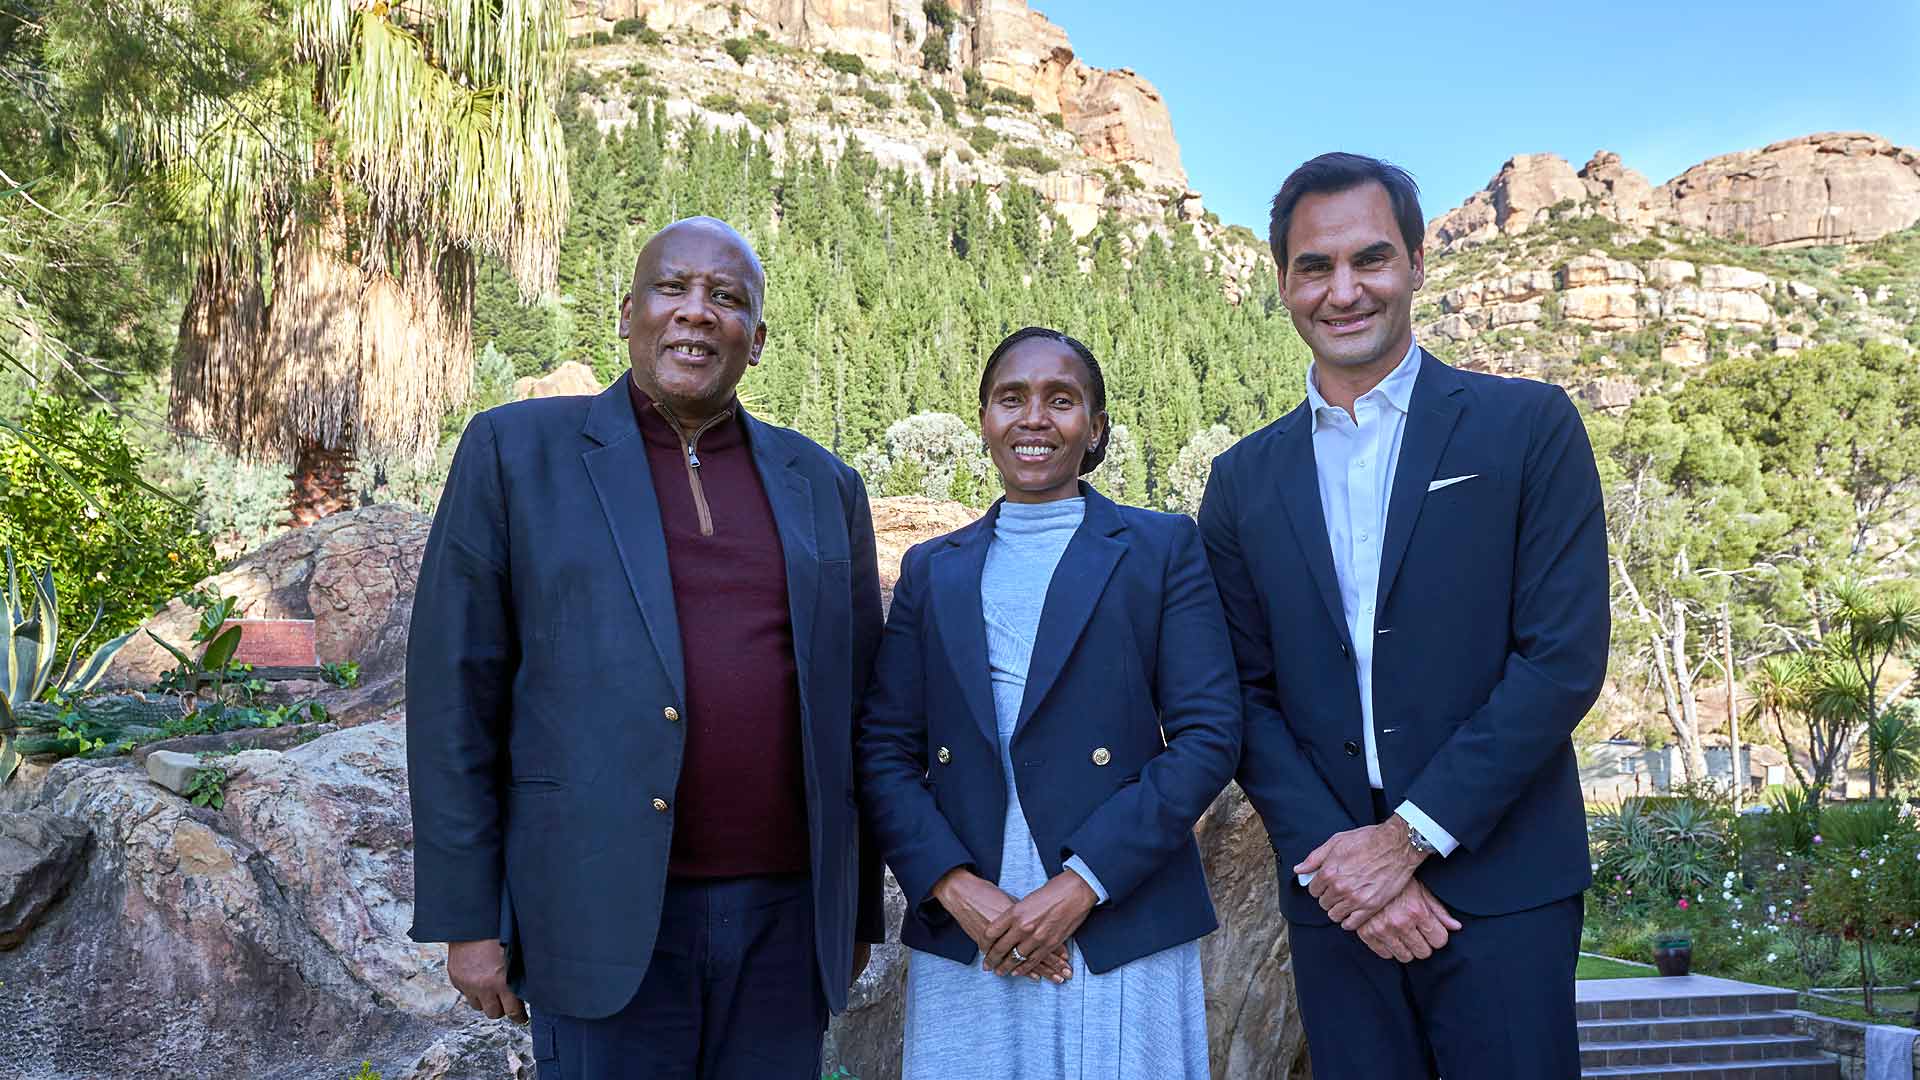 His Majesty King Letsie III, Her Majesty Queen ’Masenate Mohato Seeiso and Roger Federer